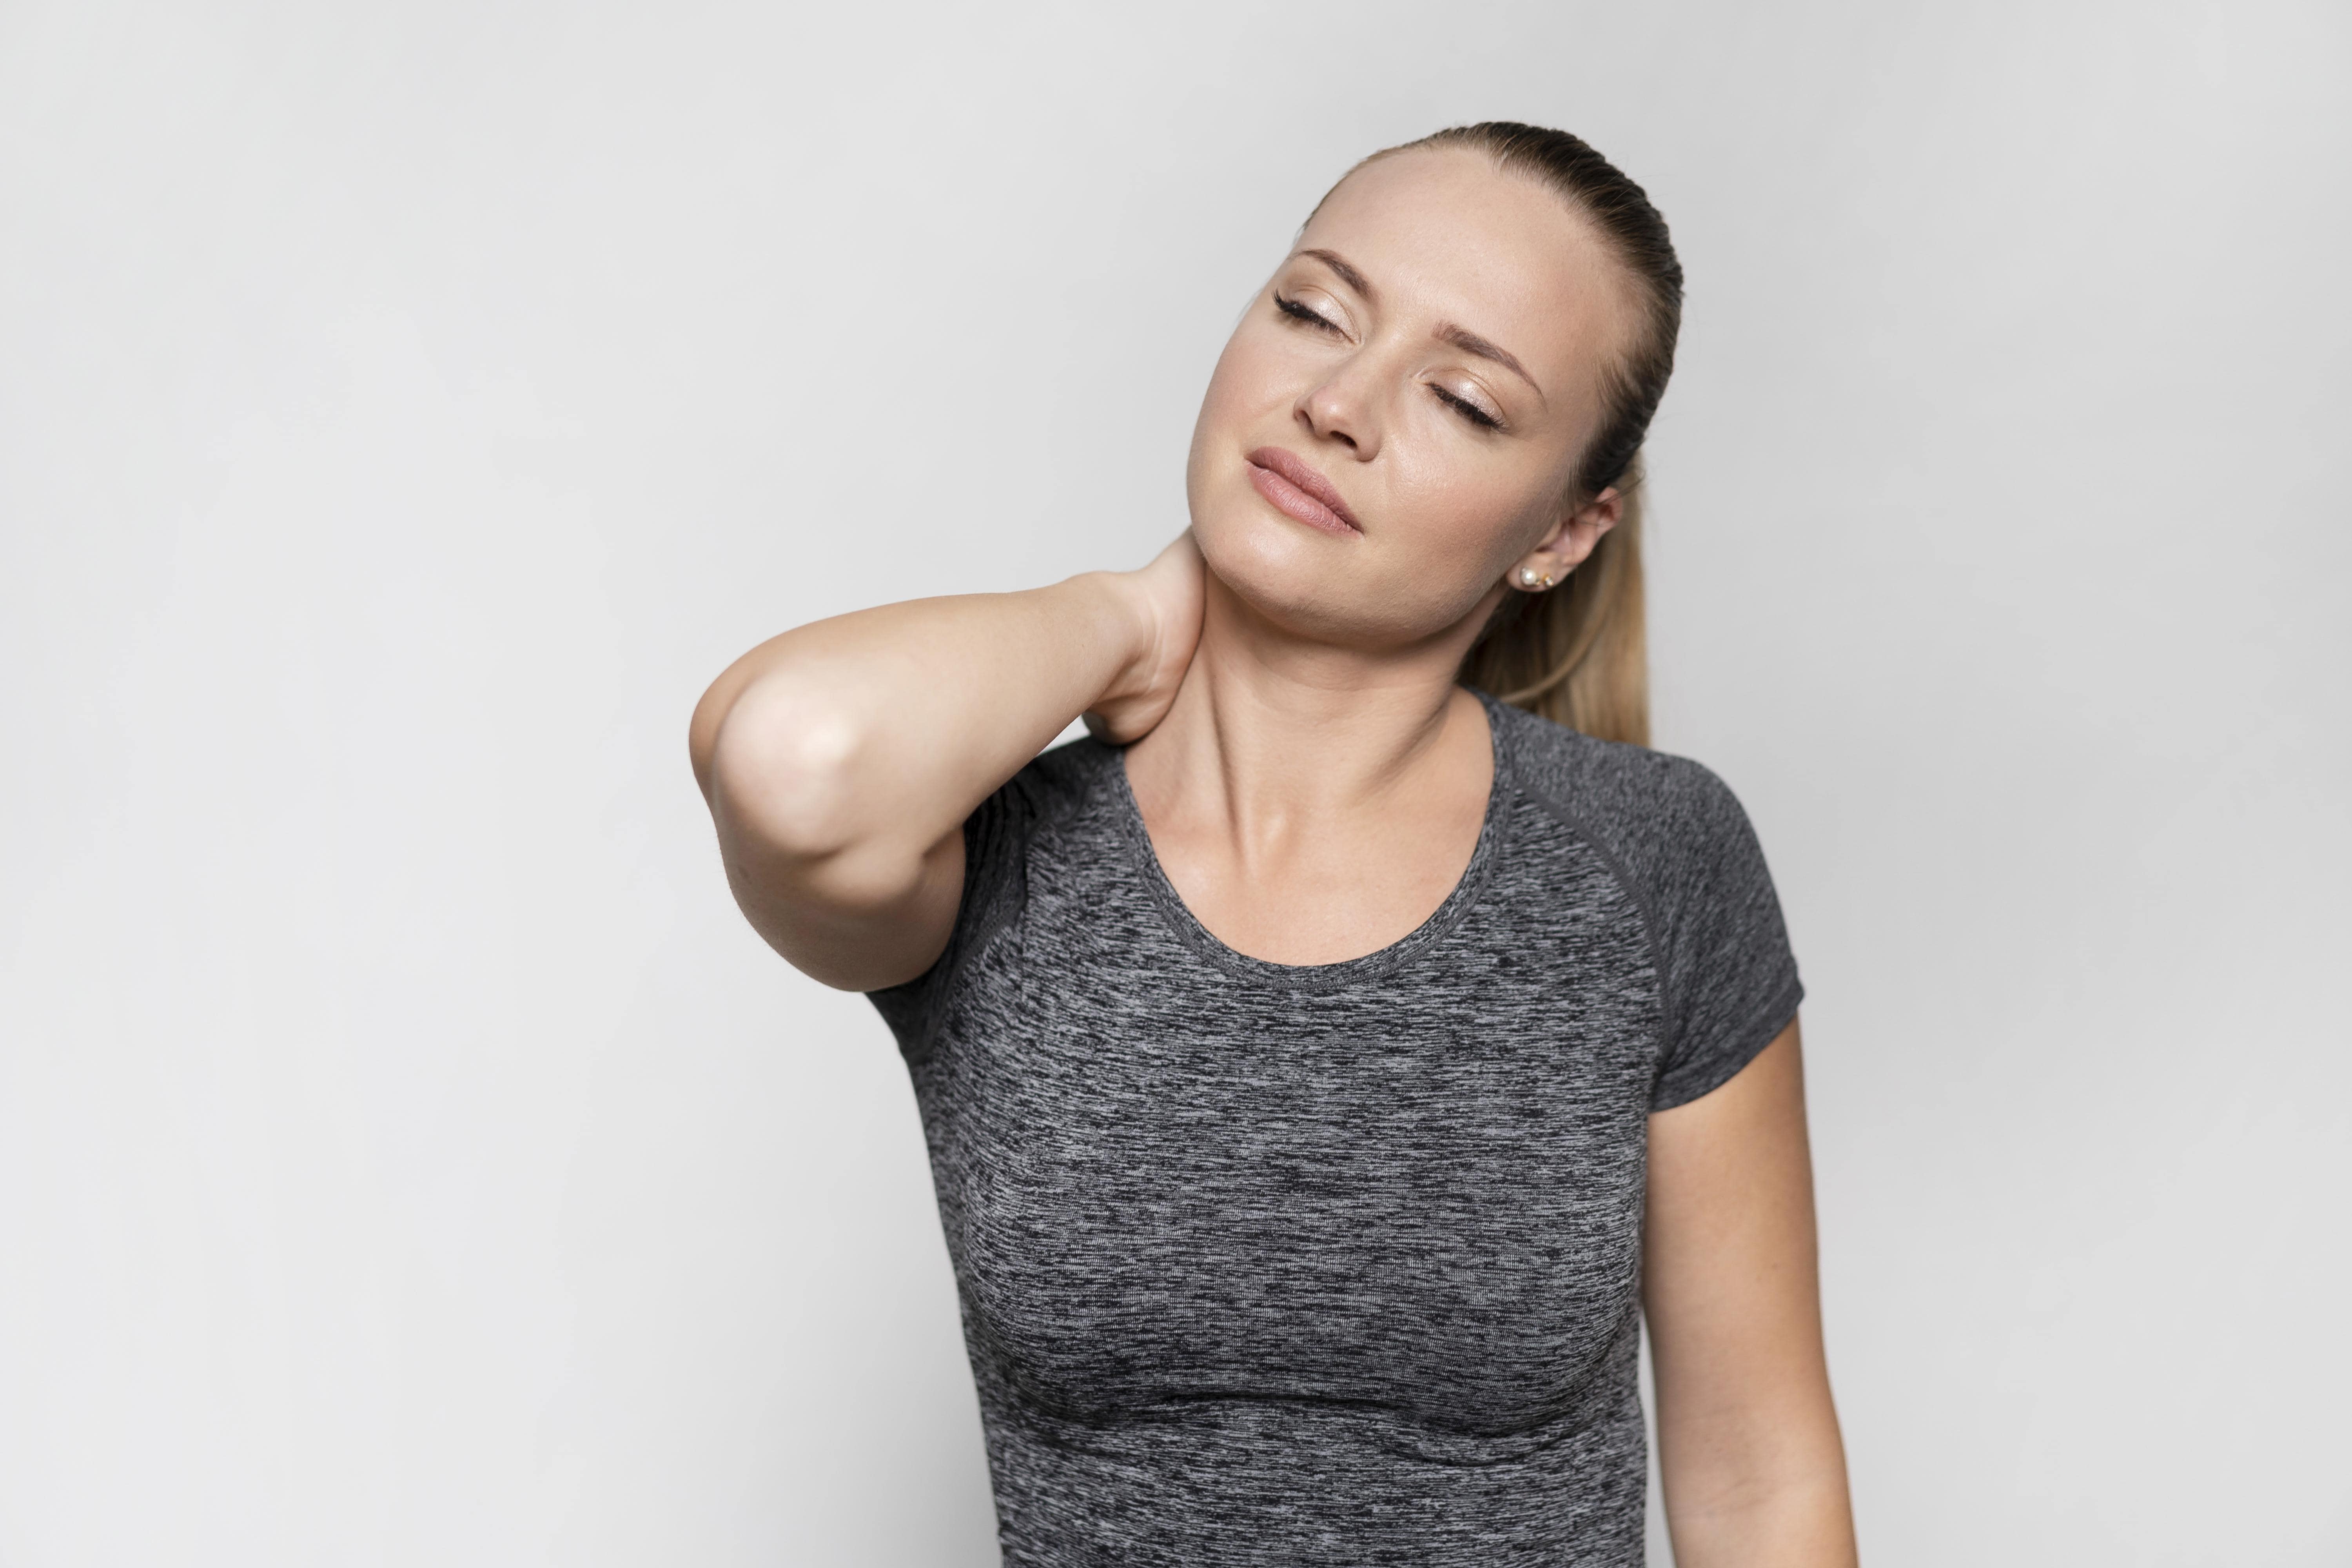 Neck pull stretches - Neck stretches for a pinched nerve